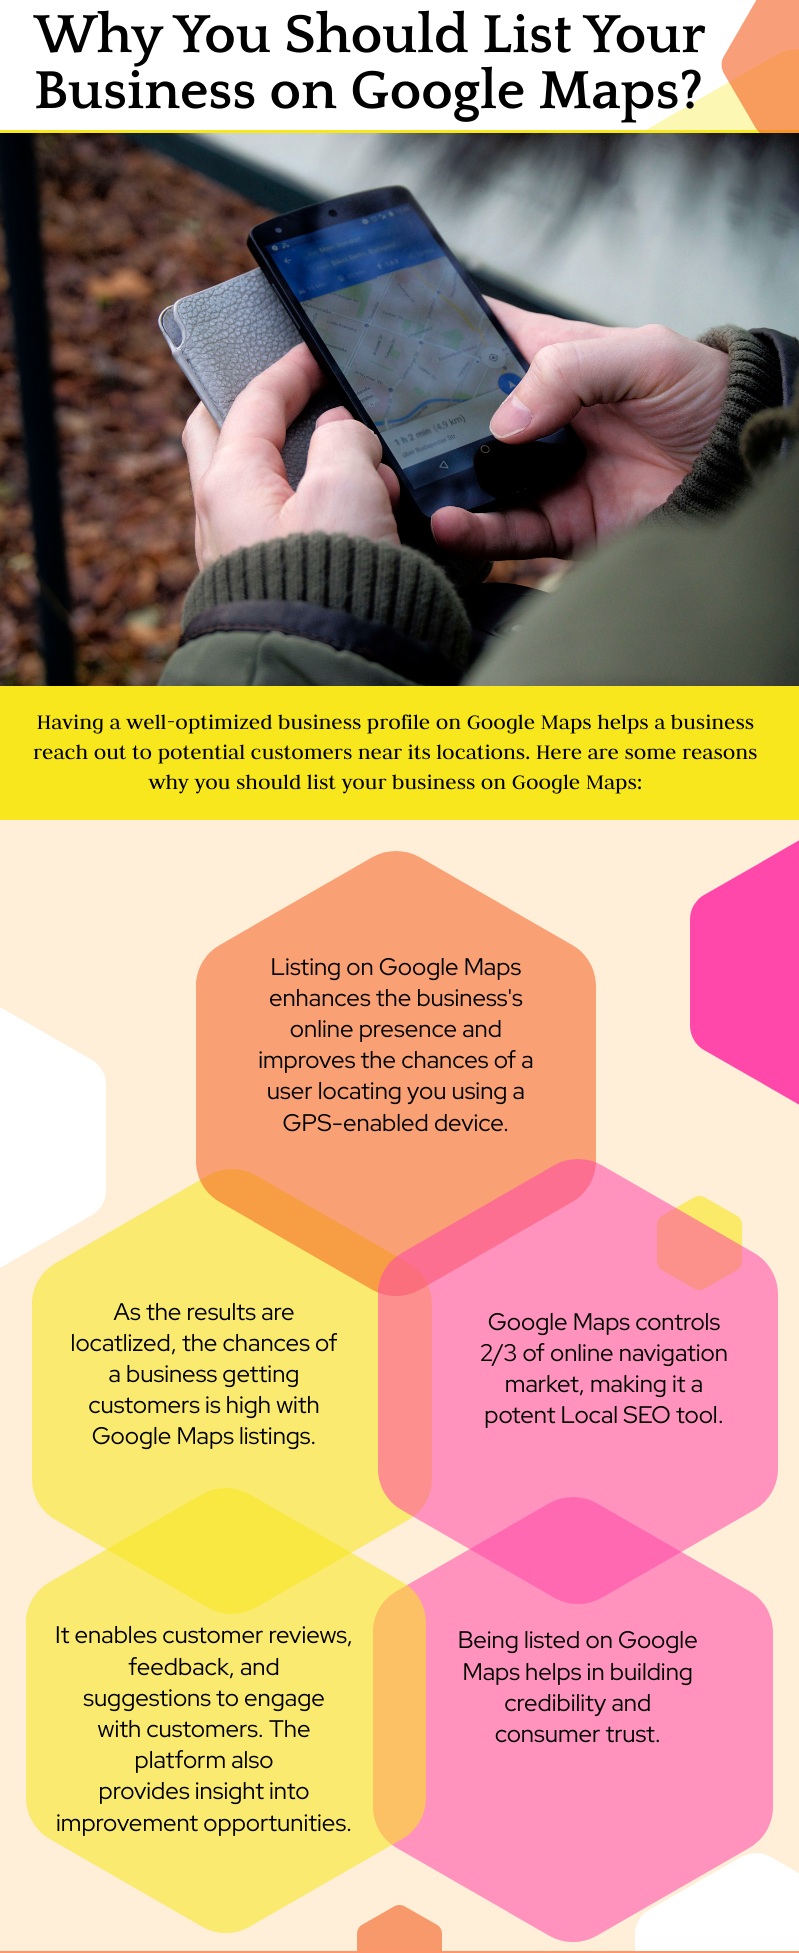 Why-You-Should-List-Your-Business-on-Google-Maps